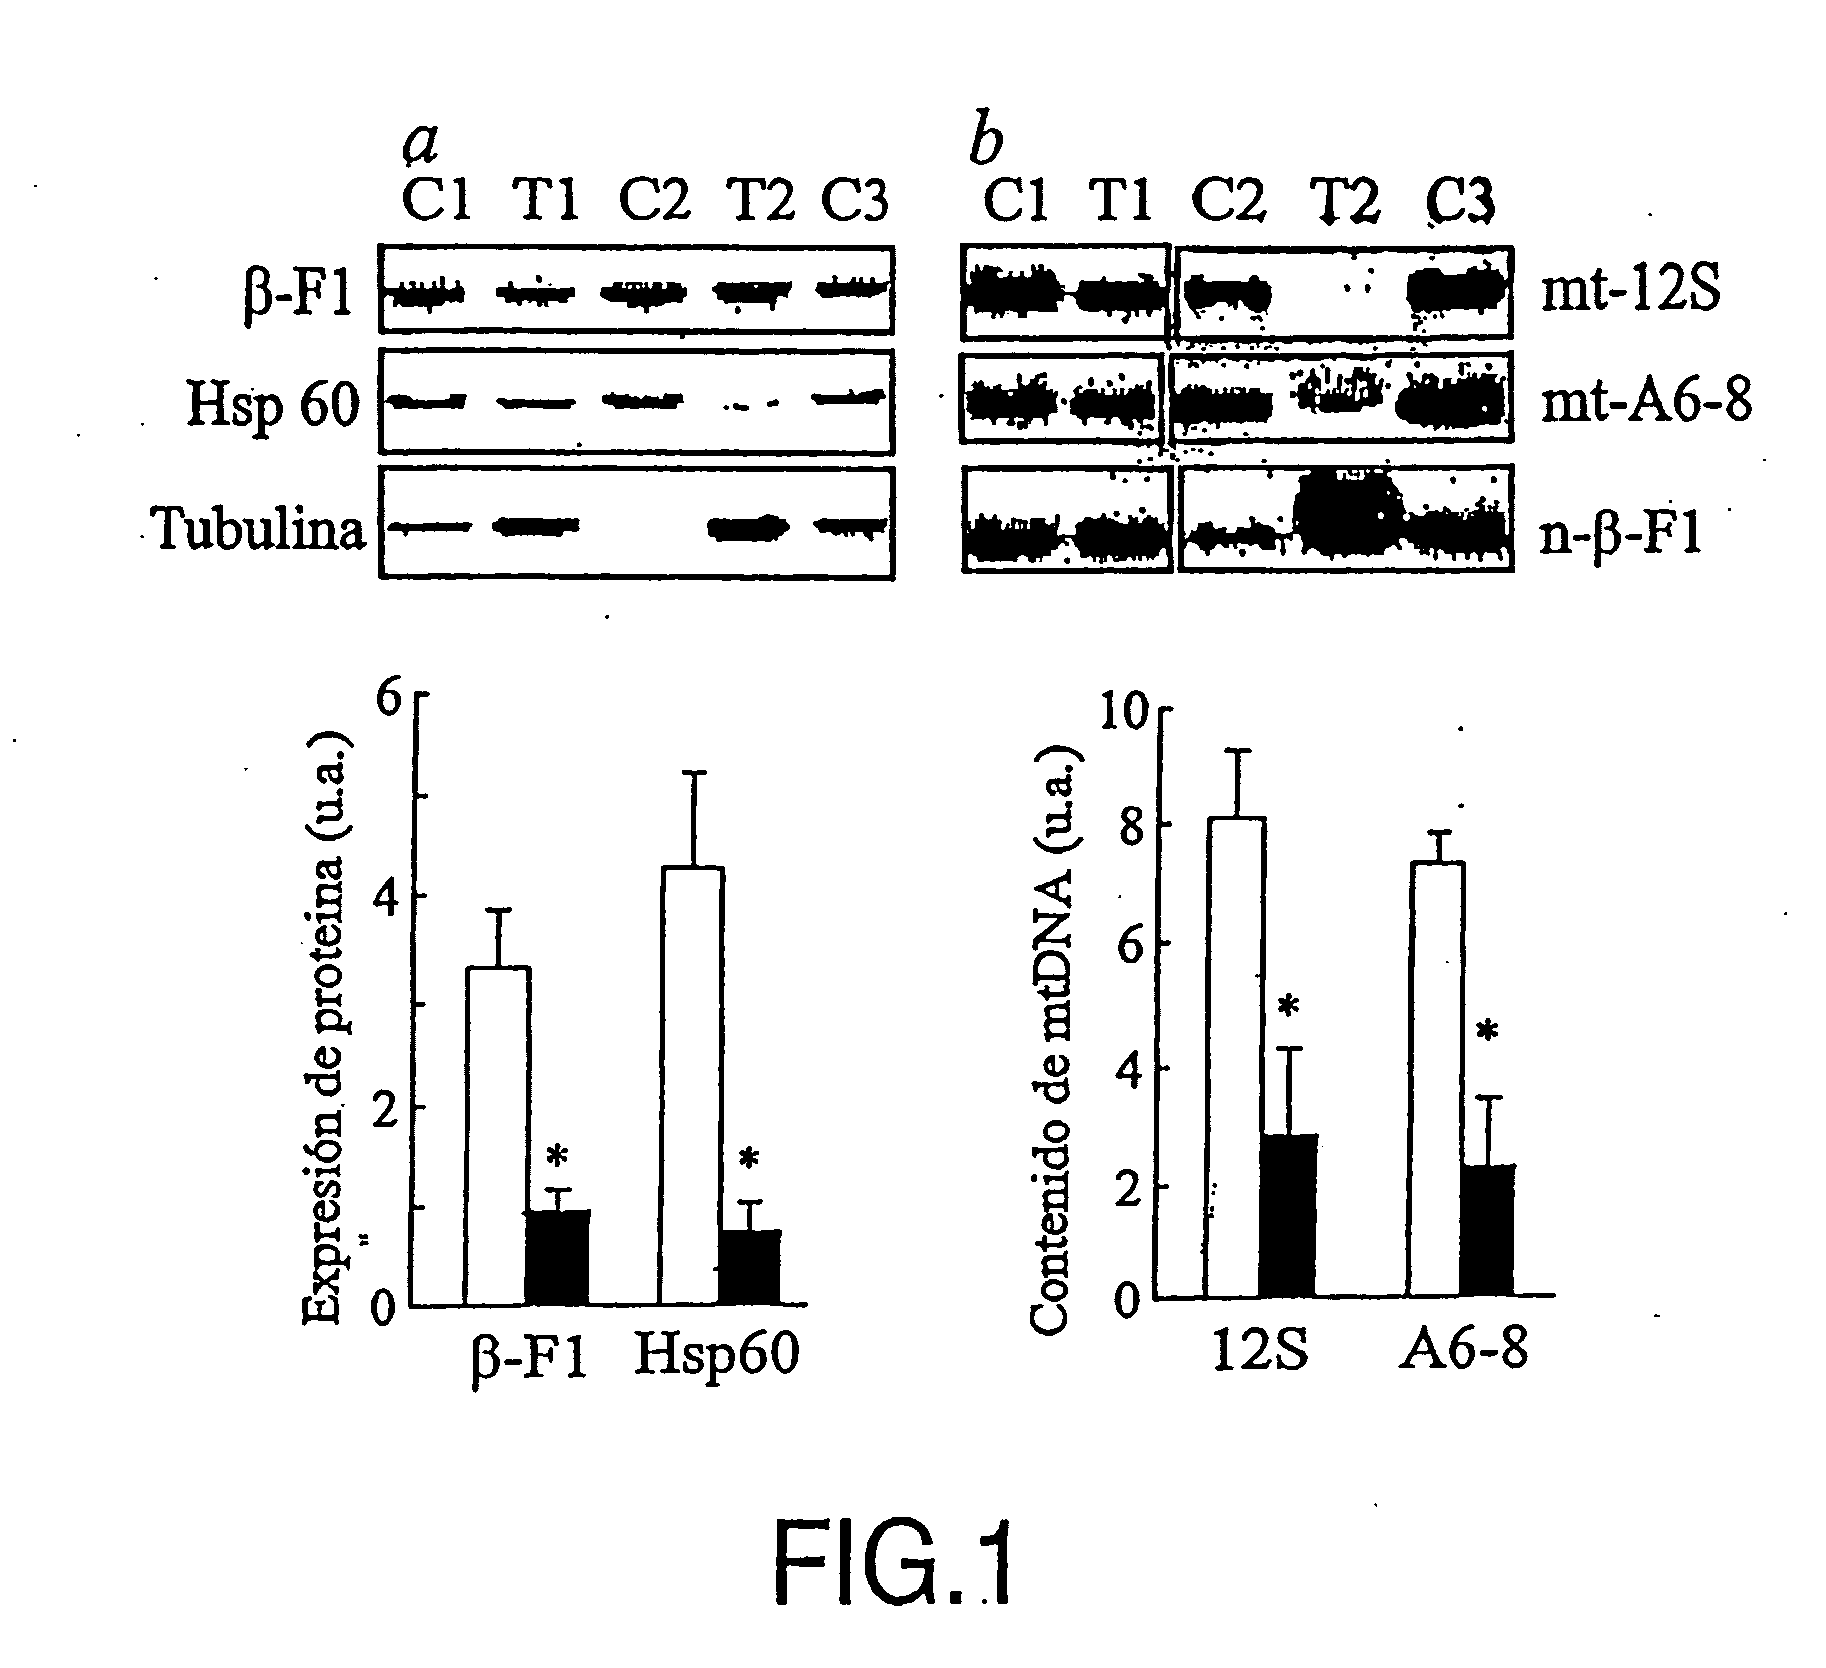 Method for cancer detection, progression analysis and malign tumour prognosis based on the study of metabolic markers of the cell